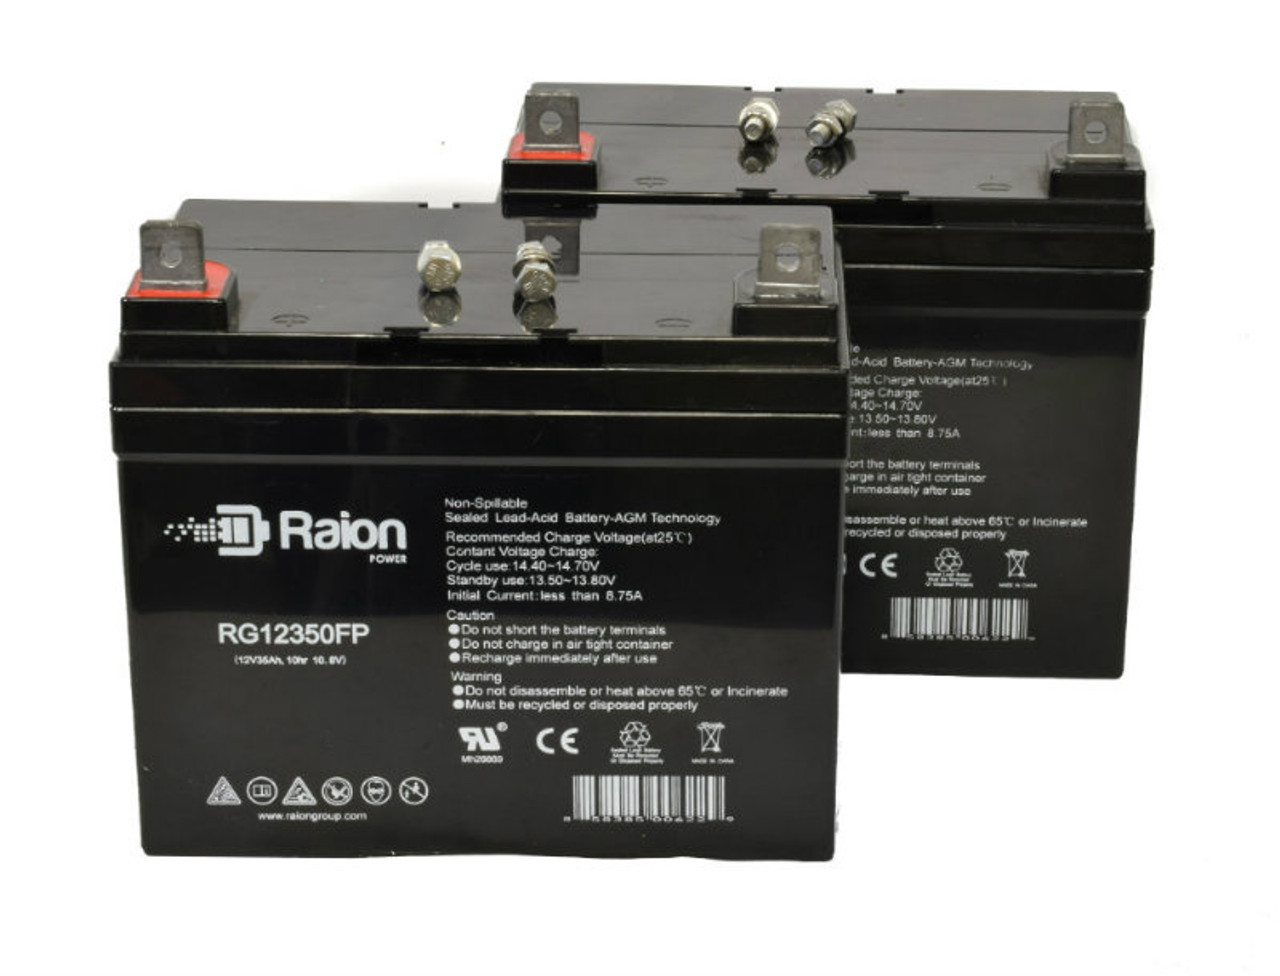 Raion Power Replacement 12V 35Ah Lawn Mower Battery for Cub Cadet HDS2165 - 2 Pack